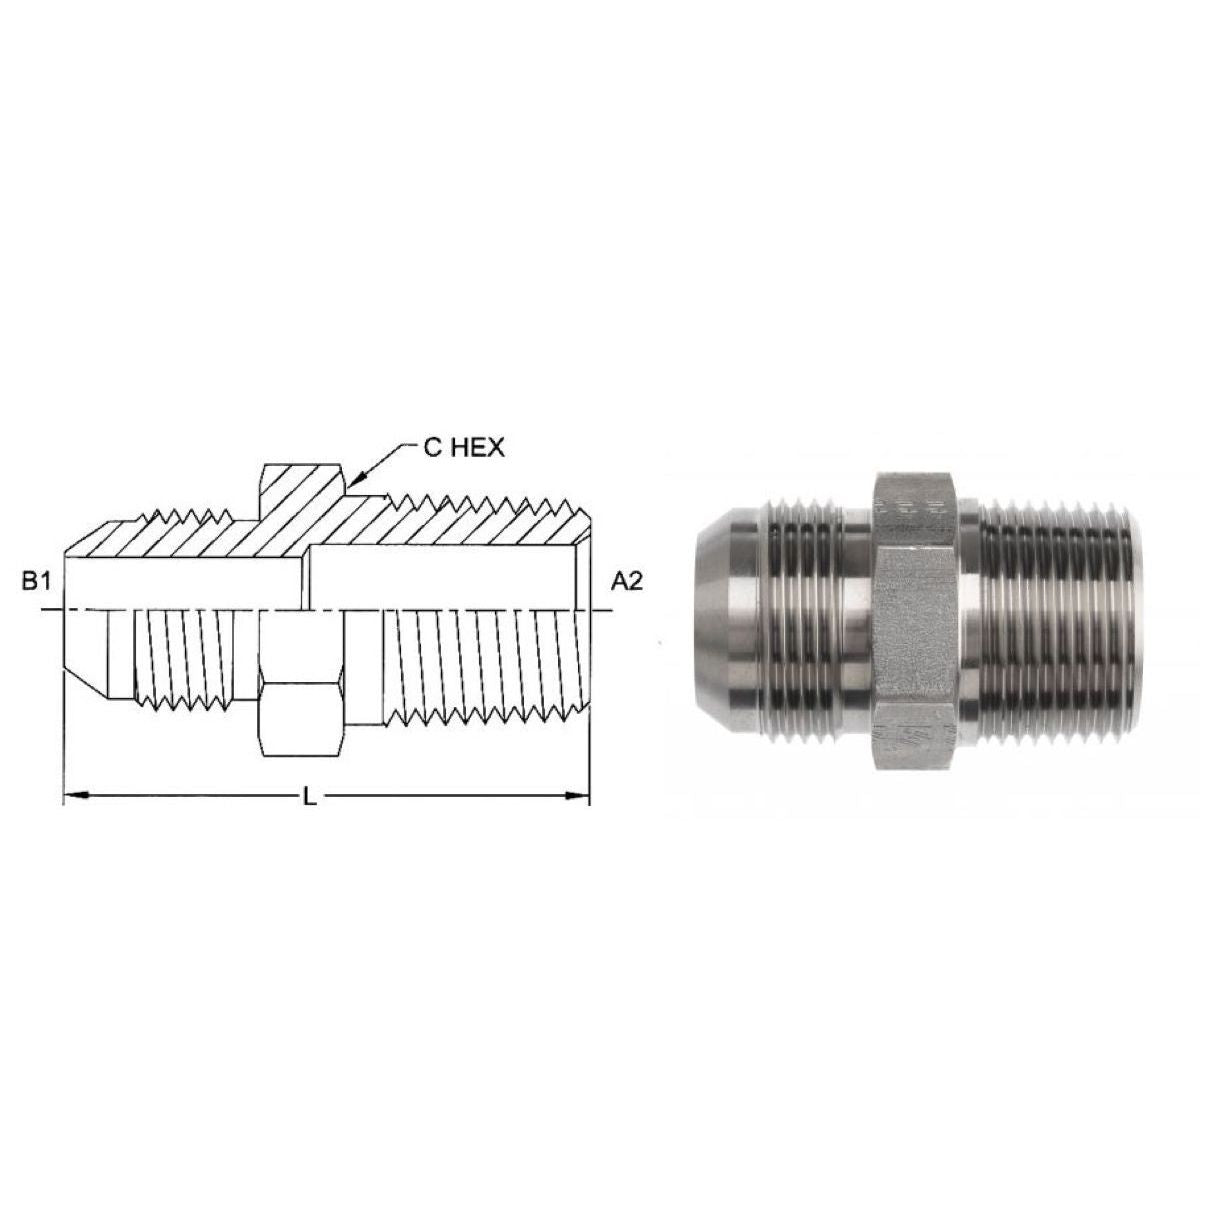 2404-08-08-SS : OneHydraulics Adapter, Straight, 0.5 (1/2") Male NPT x 0.5 (1/2") Male, Stainless Steel, 7200psi